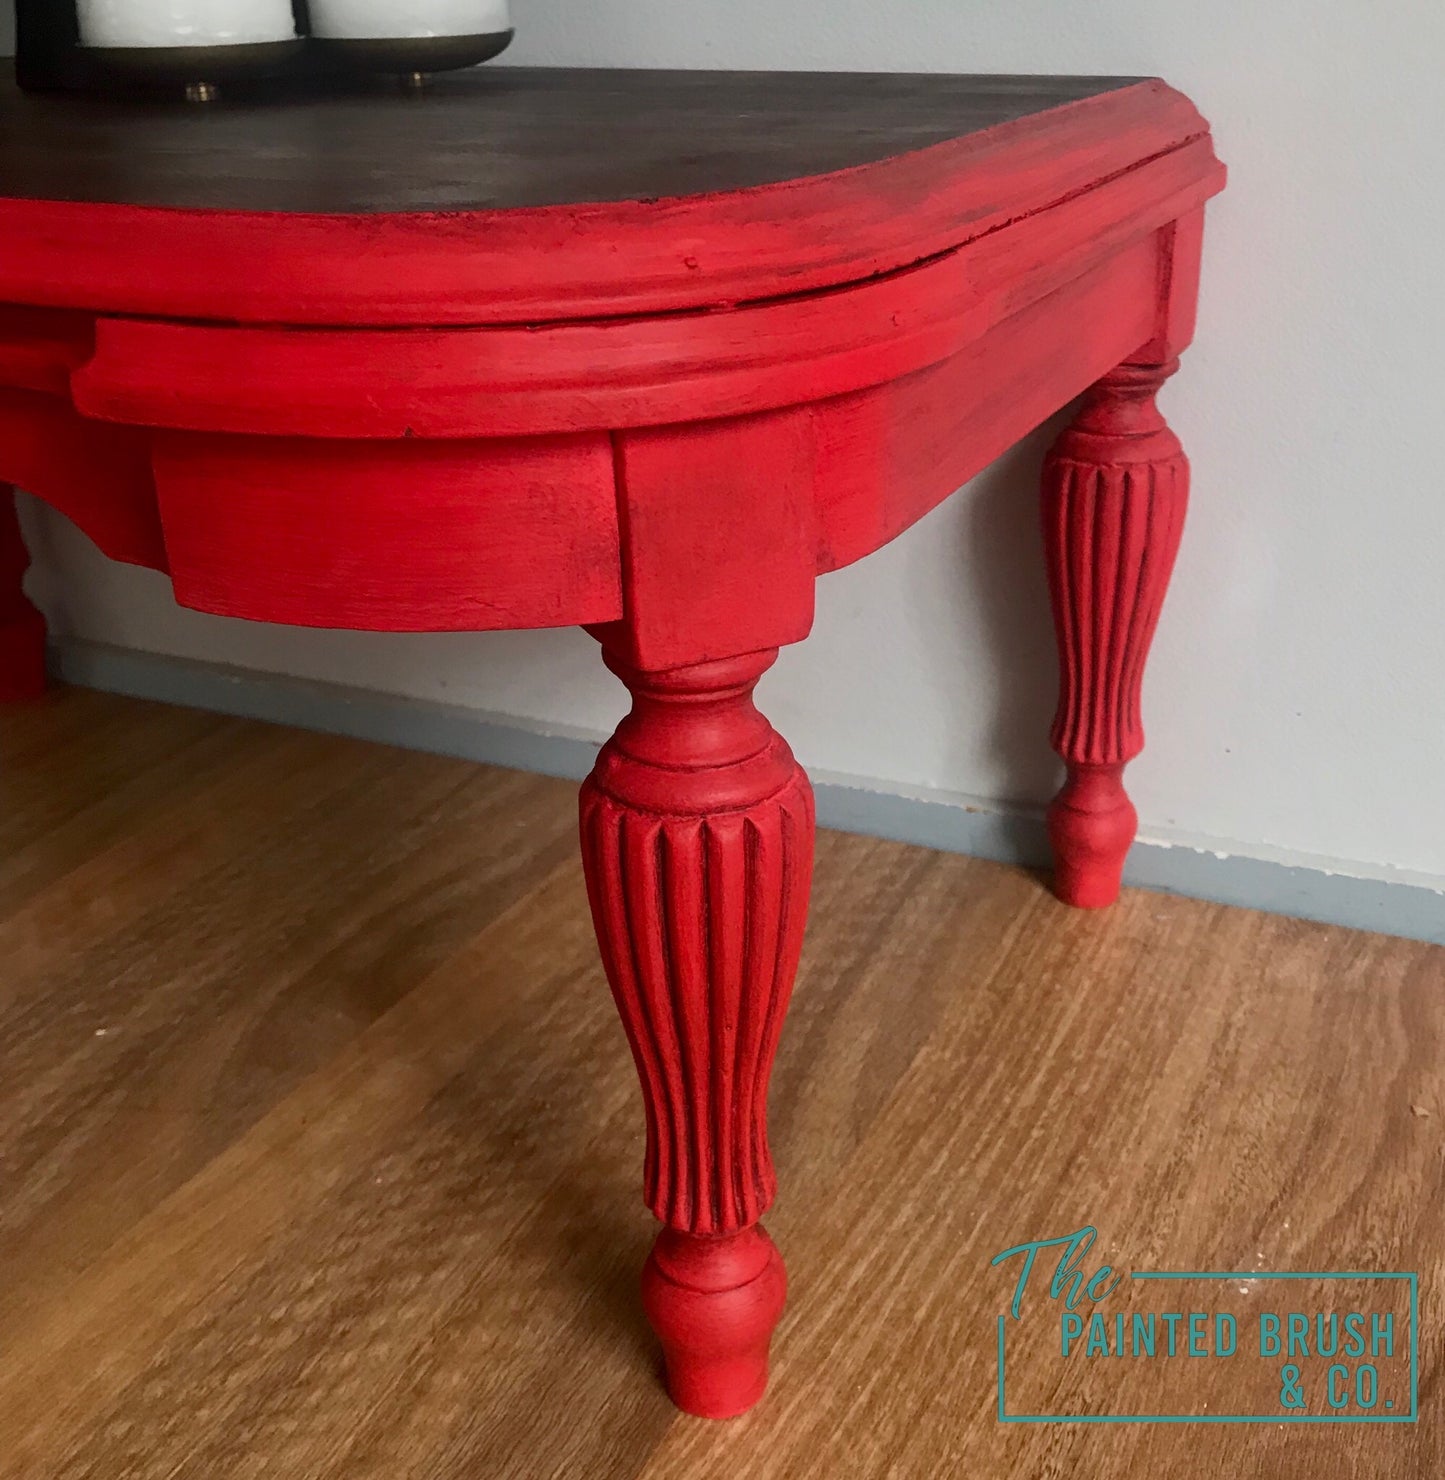 Red & Black Wax Table